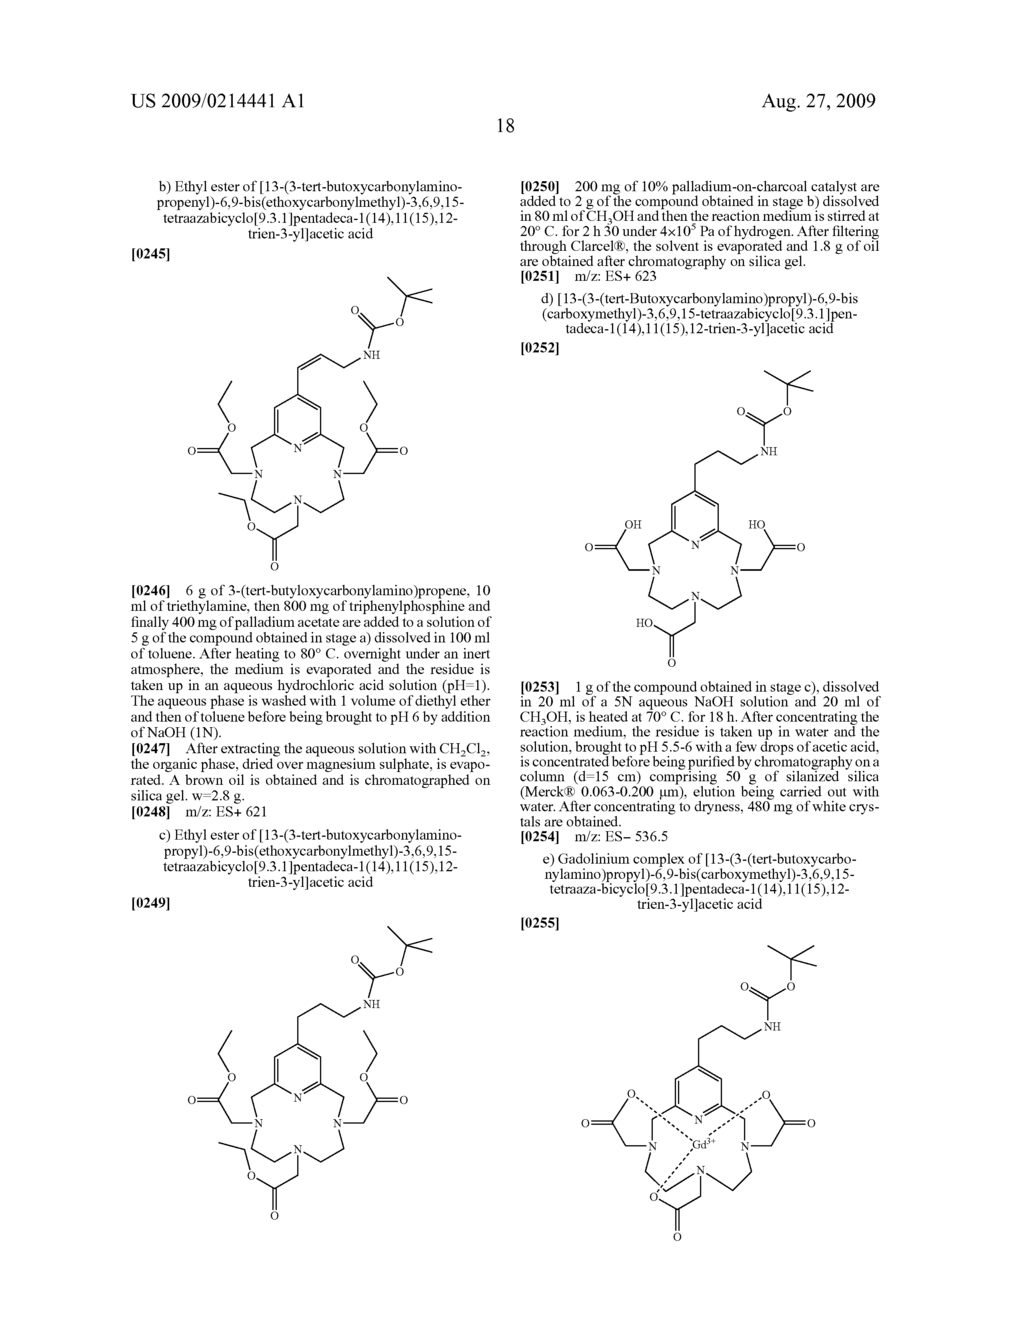 Lipophilic Chelates and Their Use in Imaging - diagram, schematic, and image 19